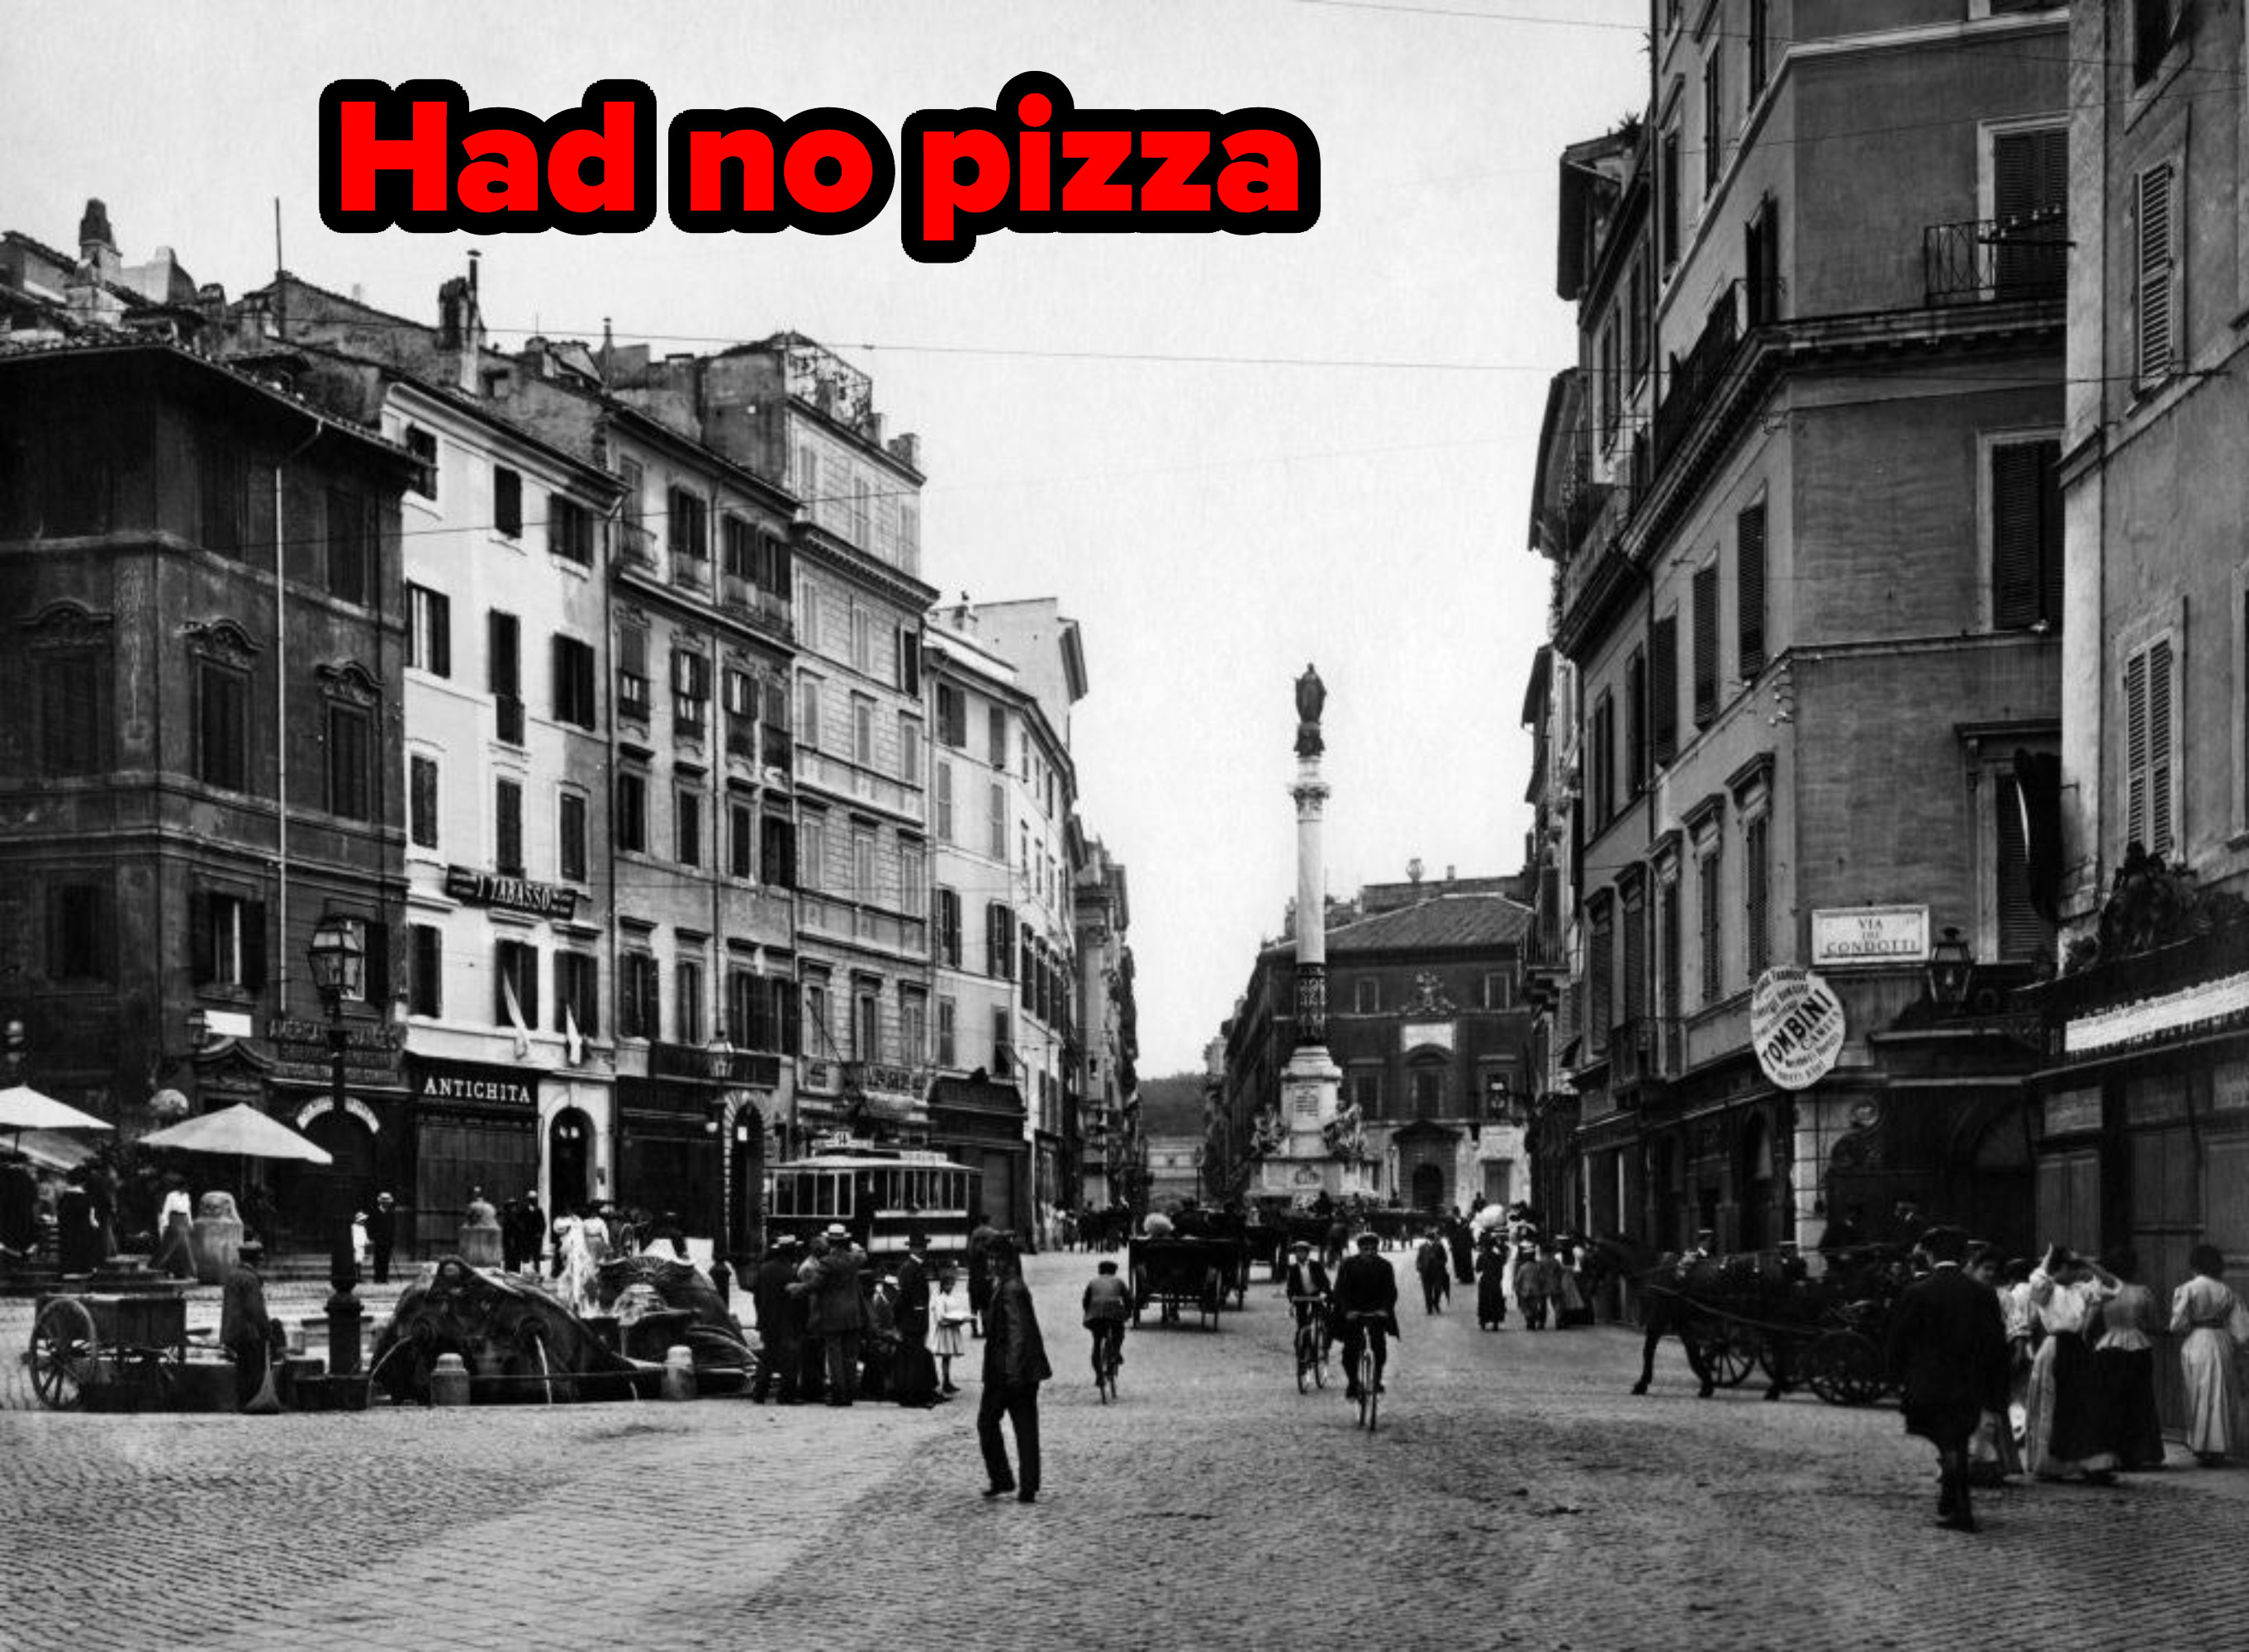 &quot;Had no pizza&quot; written over a photo of a street in Rome in the 1910s